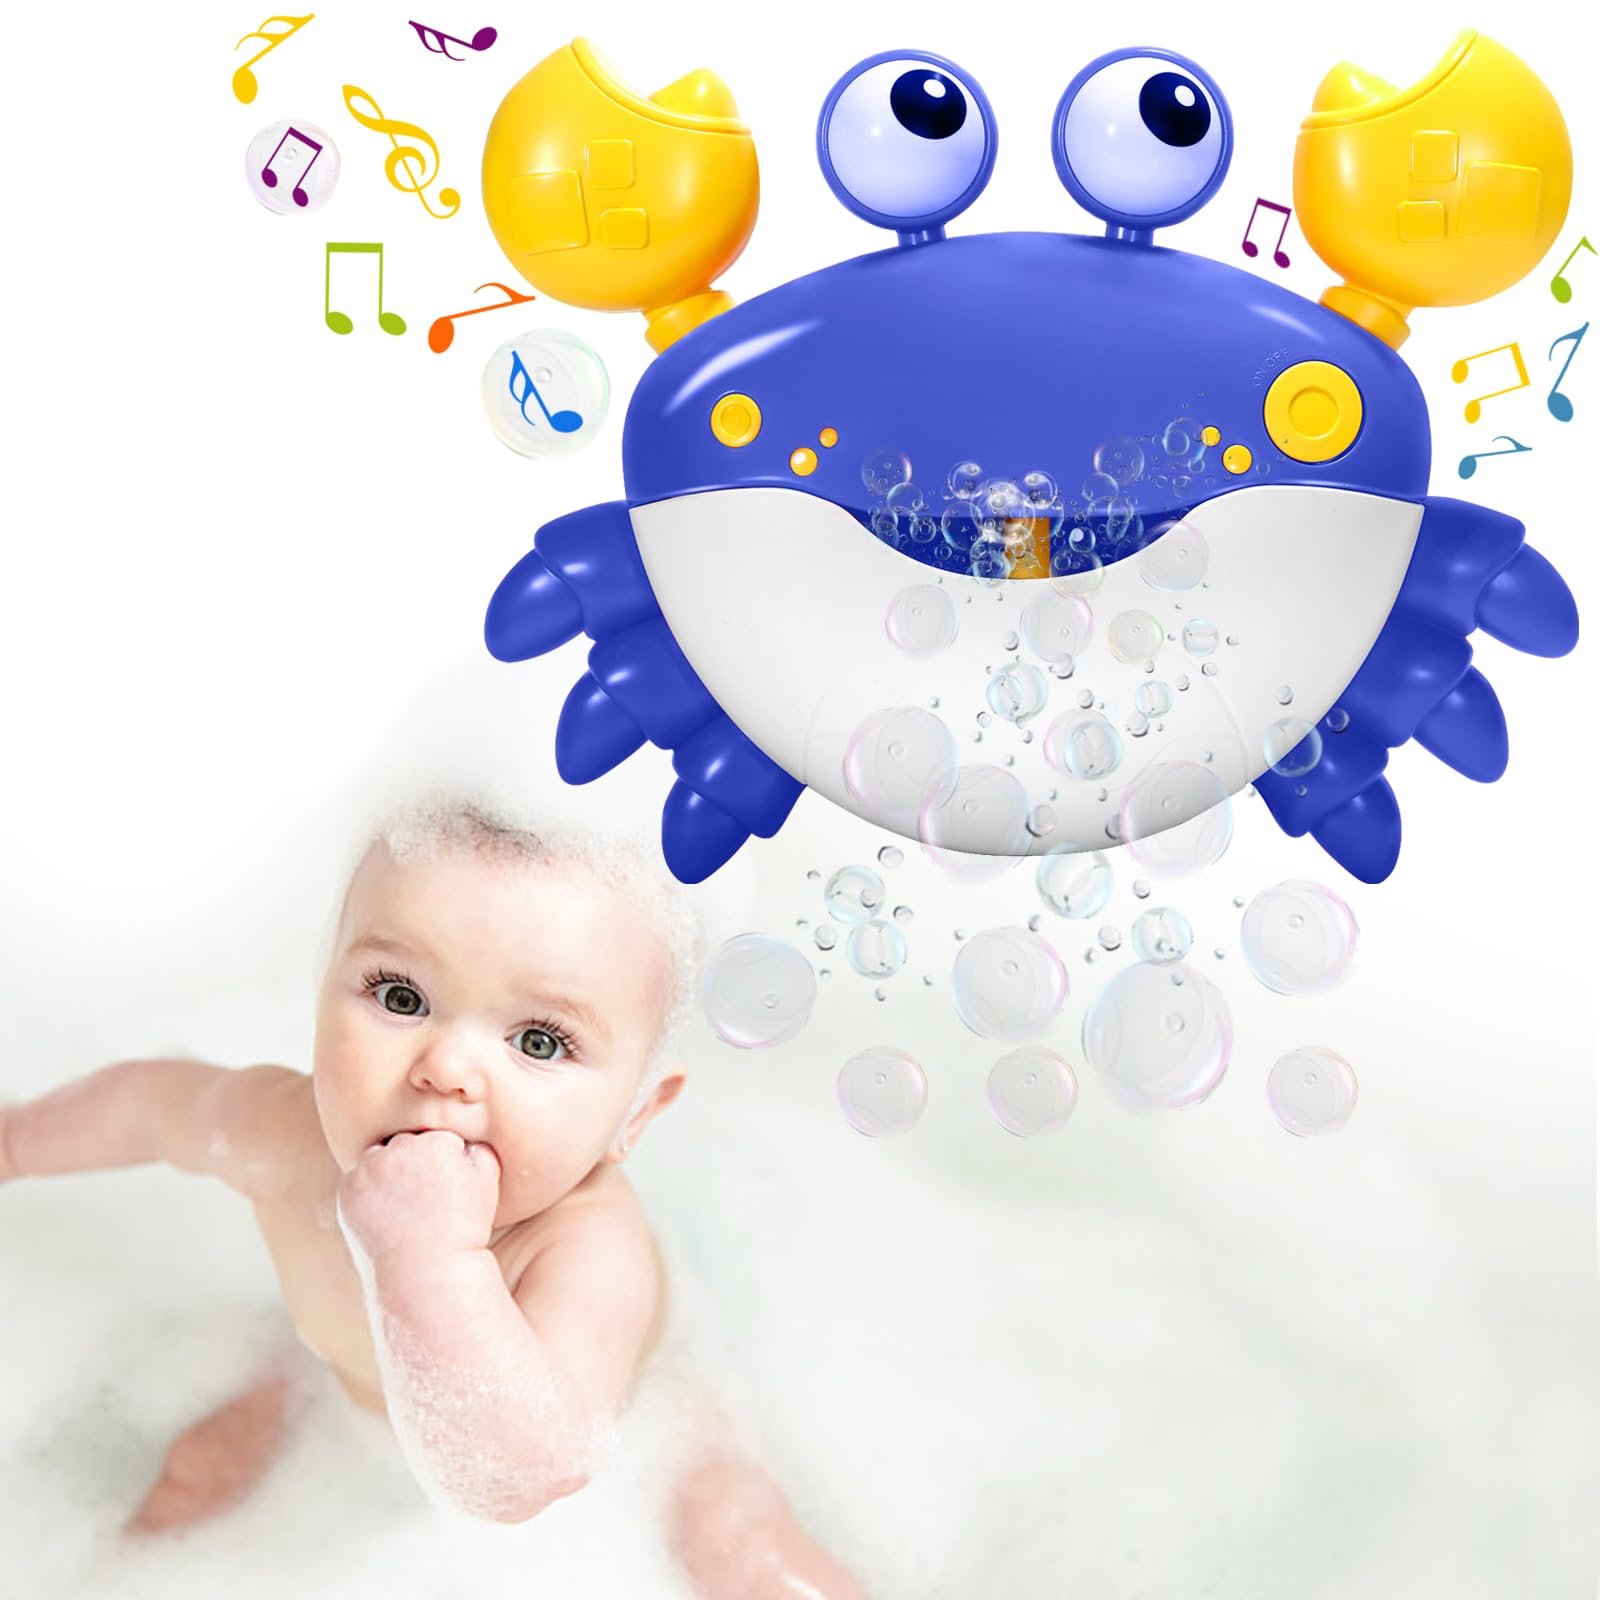 Bath Toys for Toddlers : Baby Bath Toys, Crab Bath Toys, Bubble Machine for Toddlers , Musical Toys for Toddlers , Toddler Bath Toys, Baby Boy Gifts,Baby Gifts for Girls,Battery Operated Blue